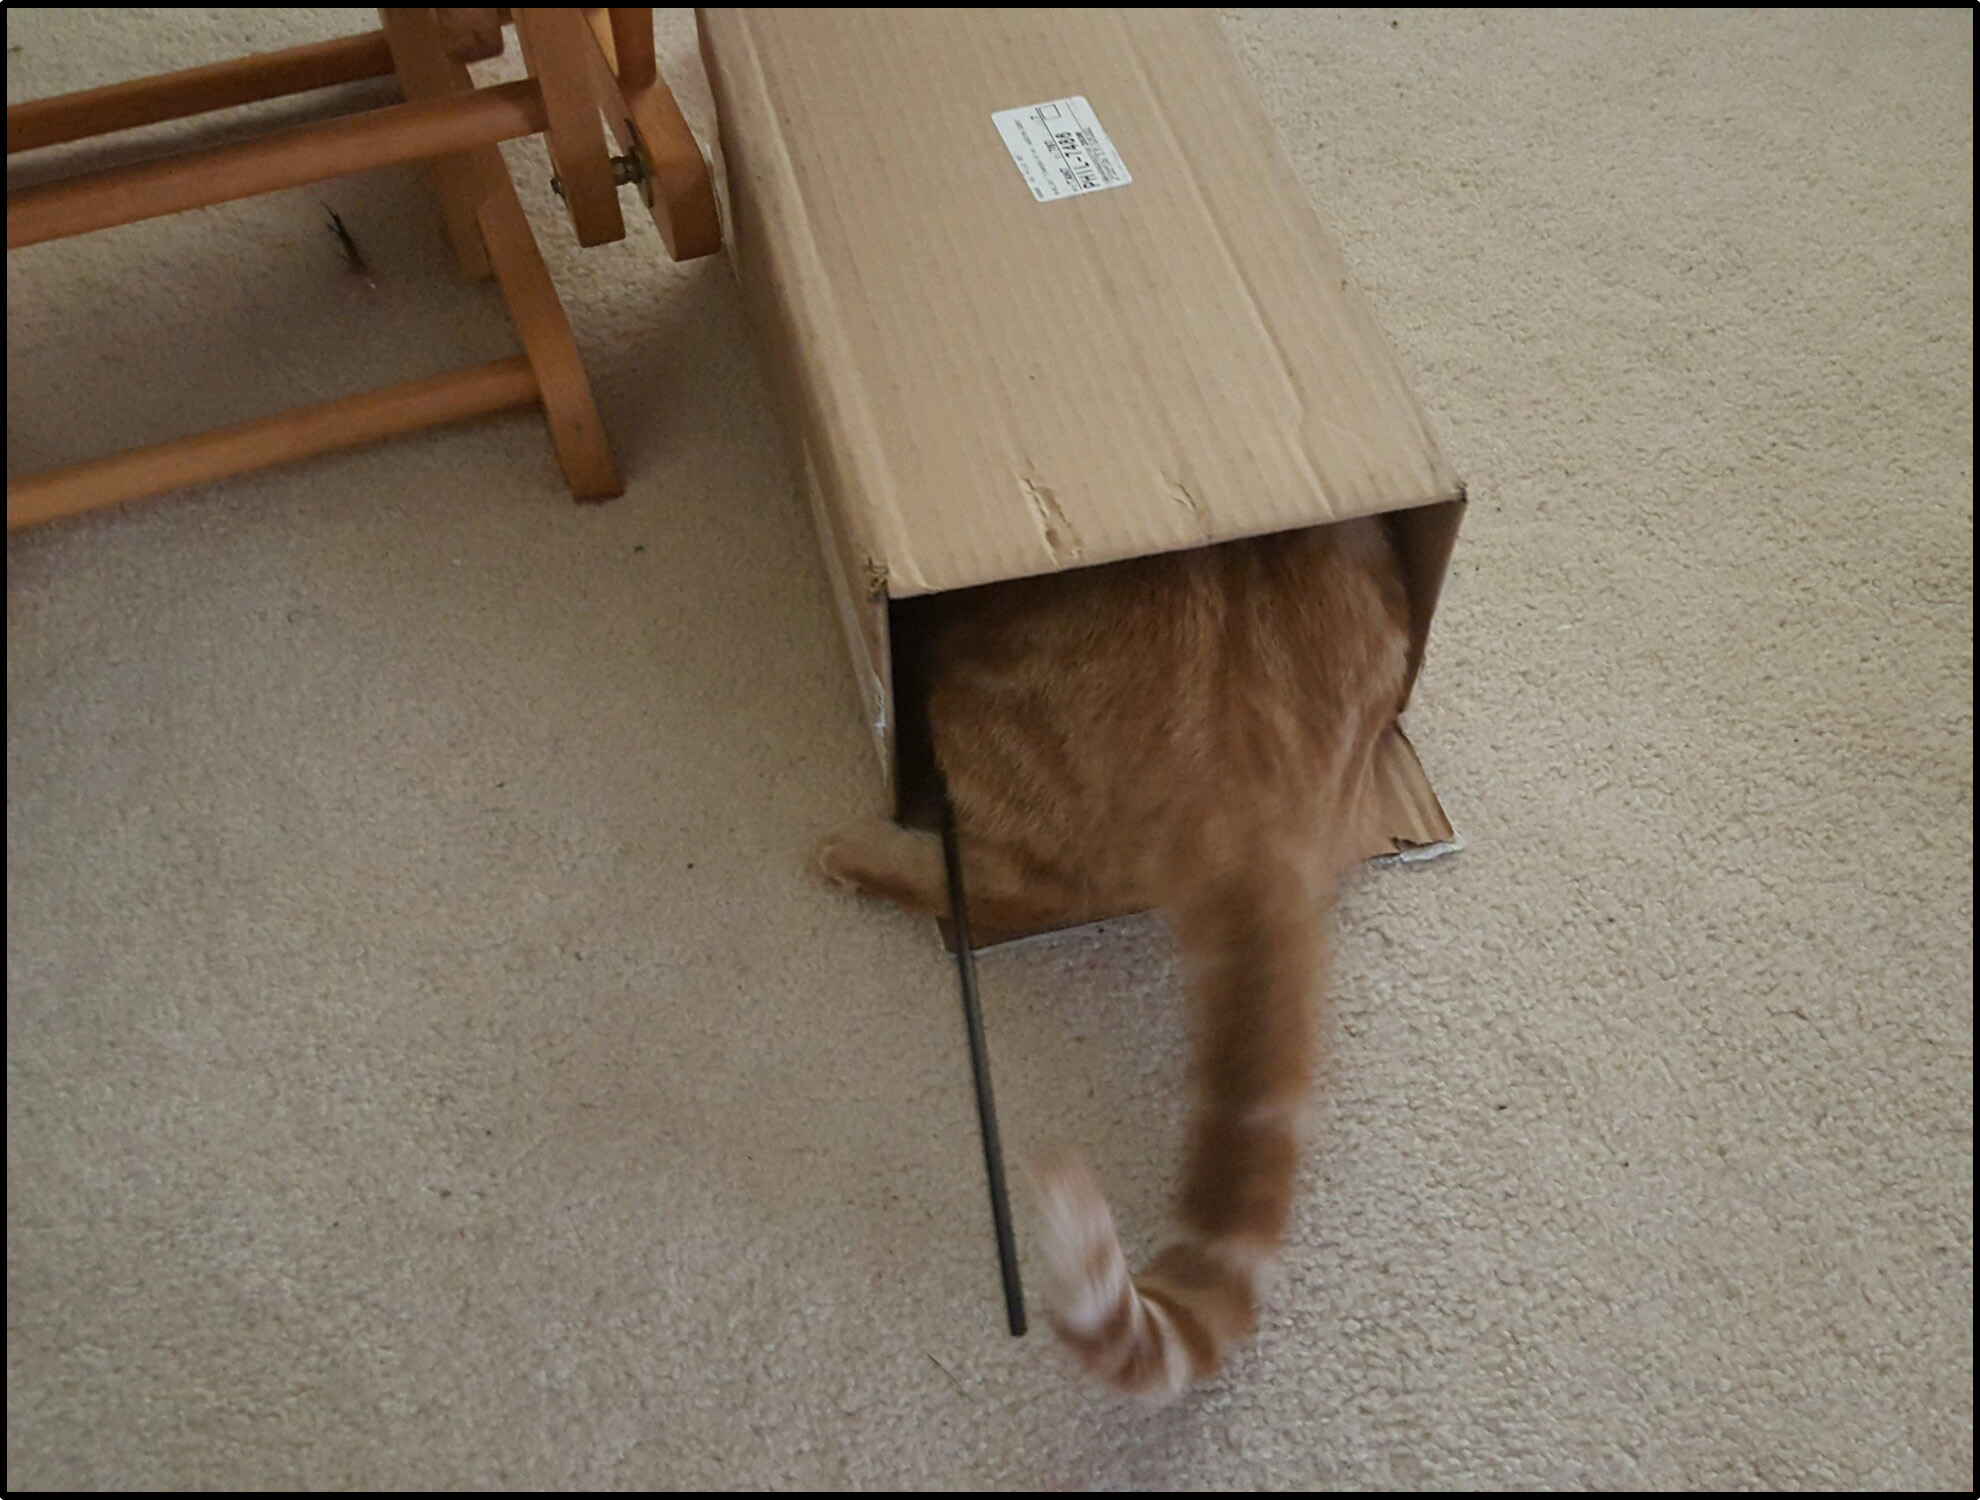 image: This is Oscar in a box